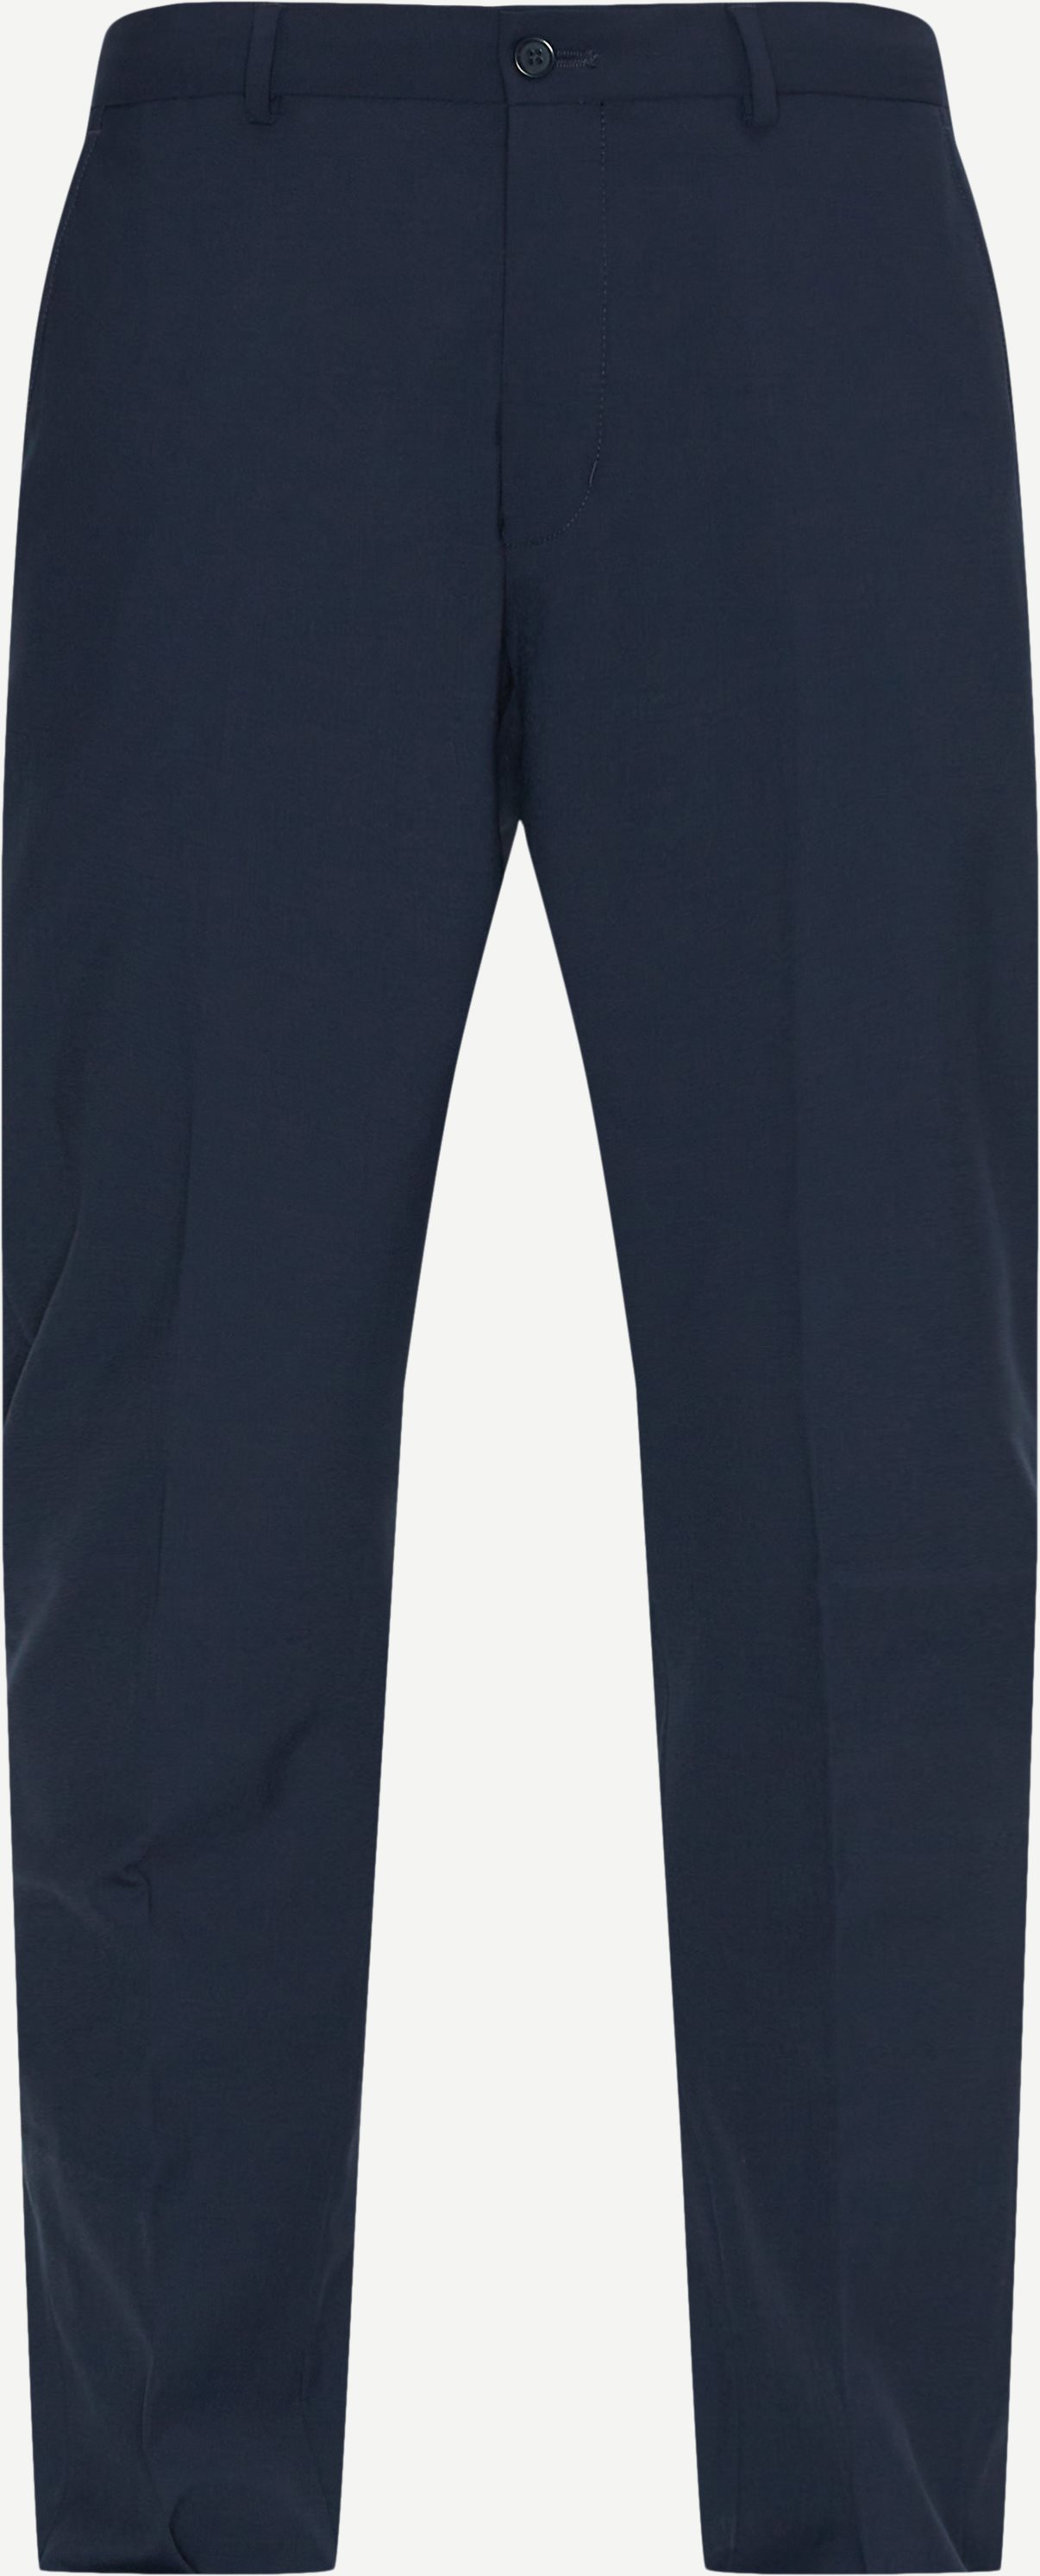 Sunwill Trousers WILL 80304-1900 Blue